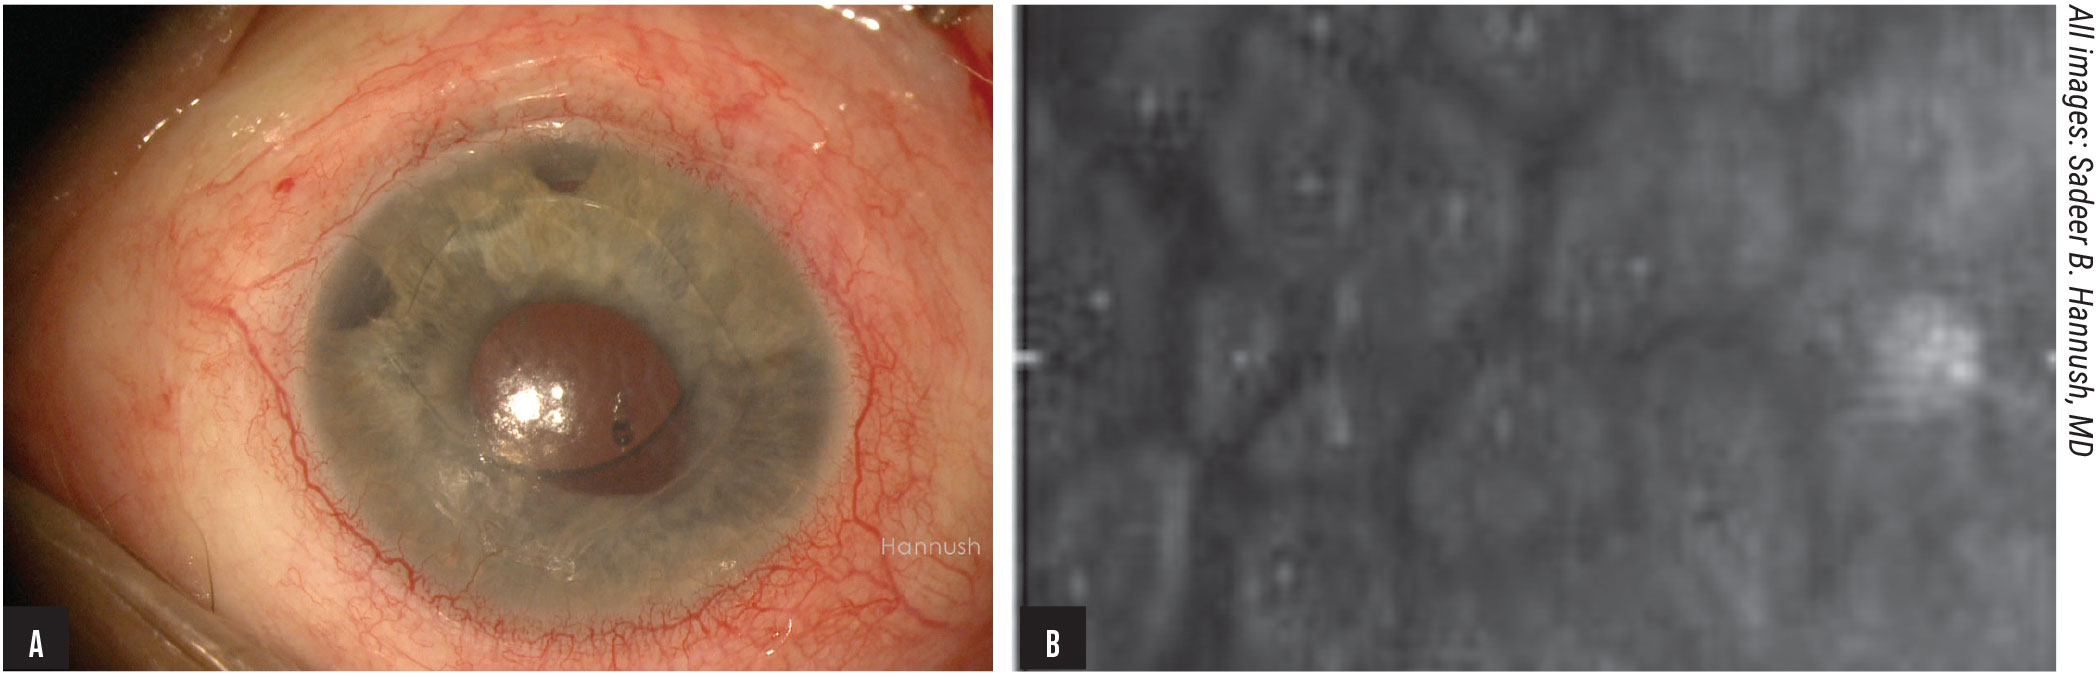 Figure 1. Ovalization of the pupil secondary to iris tuck is a potential complication of AC IOLs (A). This same patient also had a low endothelial cell count with pleomorphism and polymegathism (B).